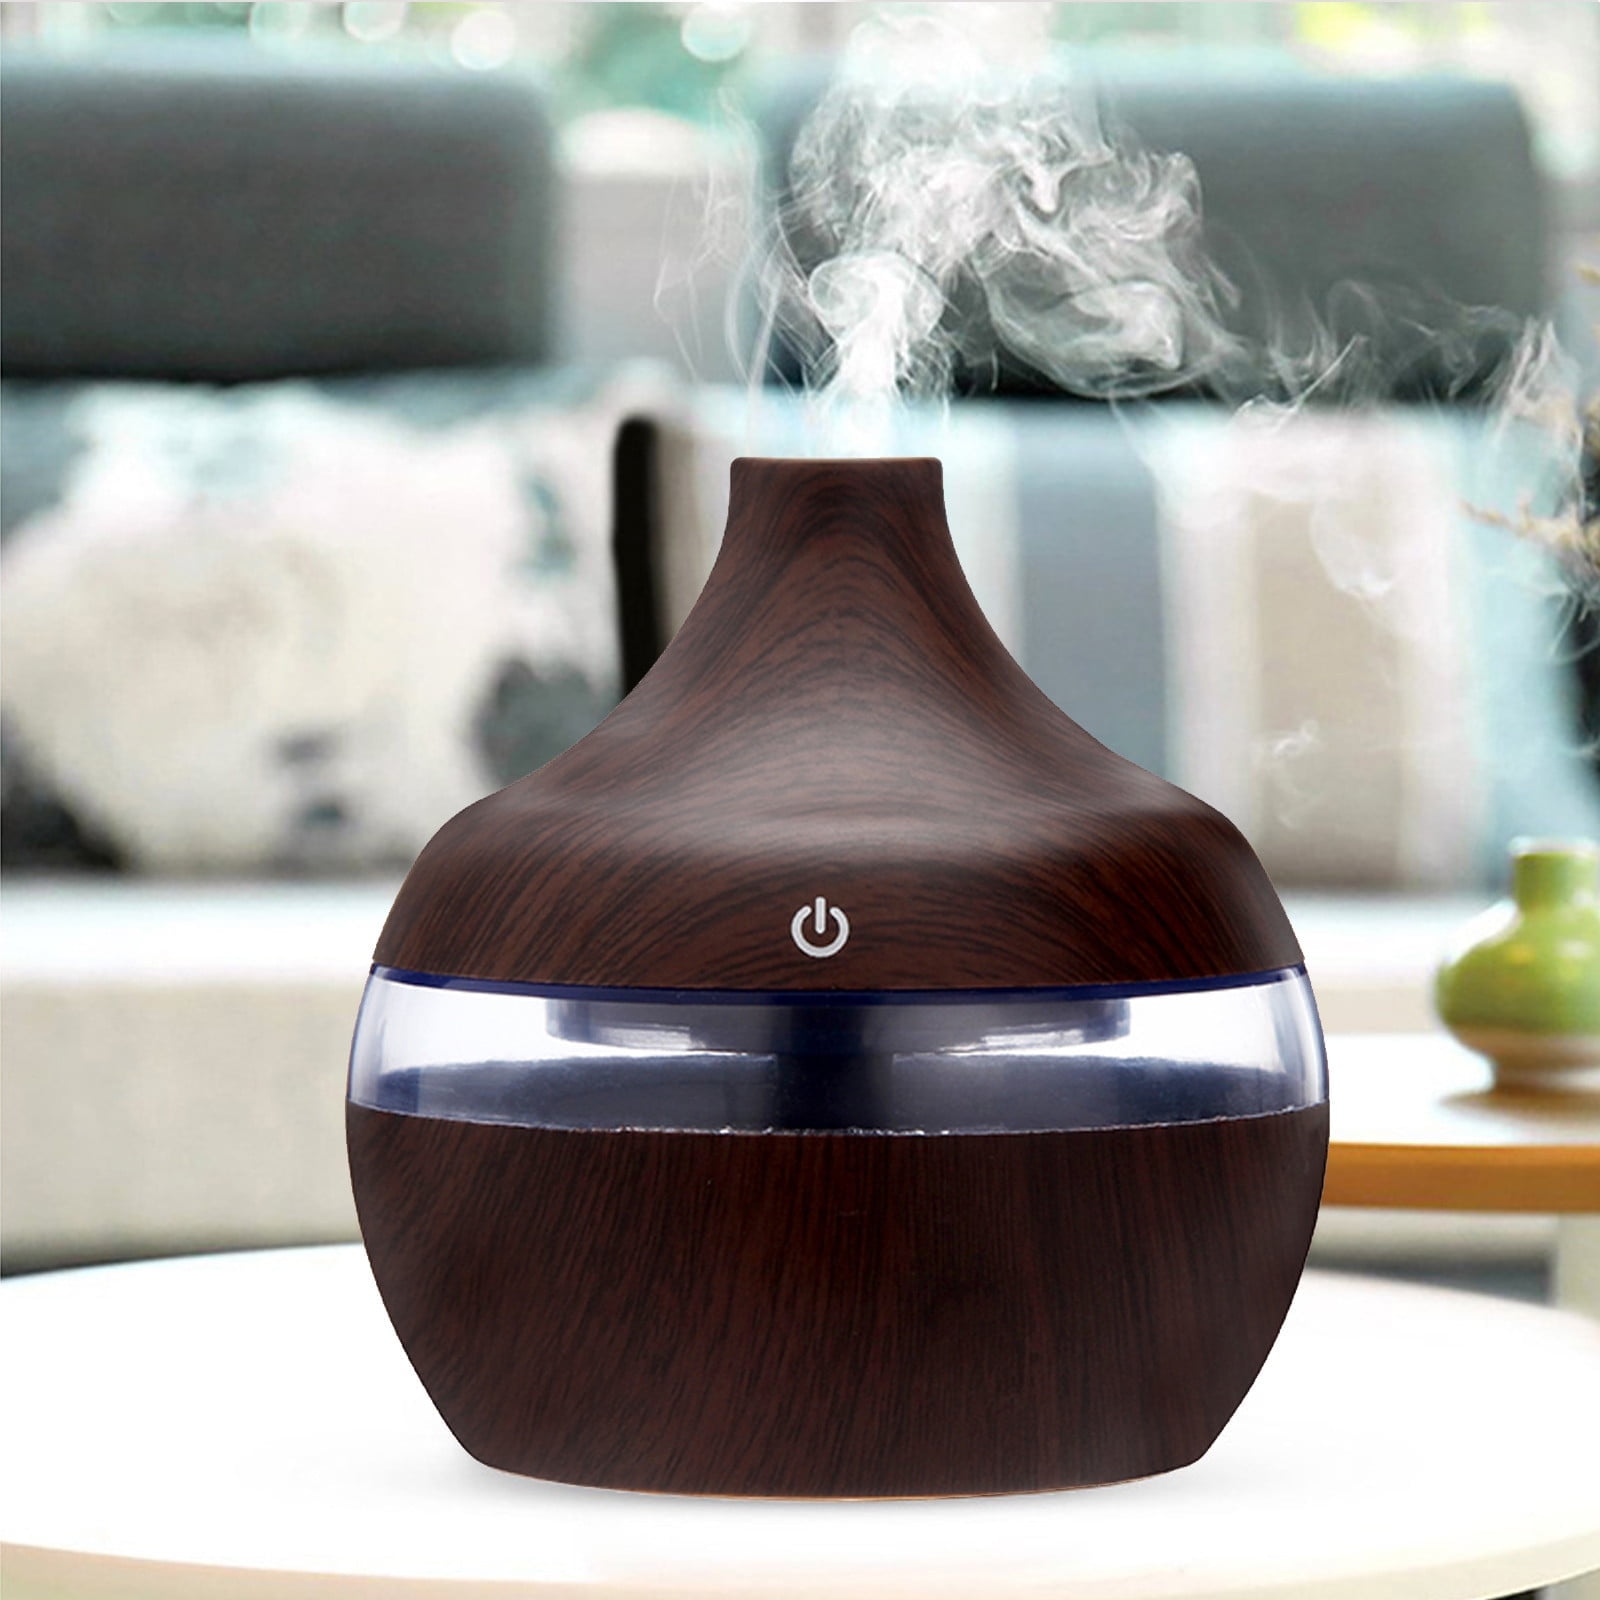 Essential Oil Diffusers for Home with Top 10 Oil Diffuser Gift Sets, 550ml  Aroma Diffuser for Essential Oils Large Room, Ultrasonic Cool Mist Diffuser